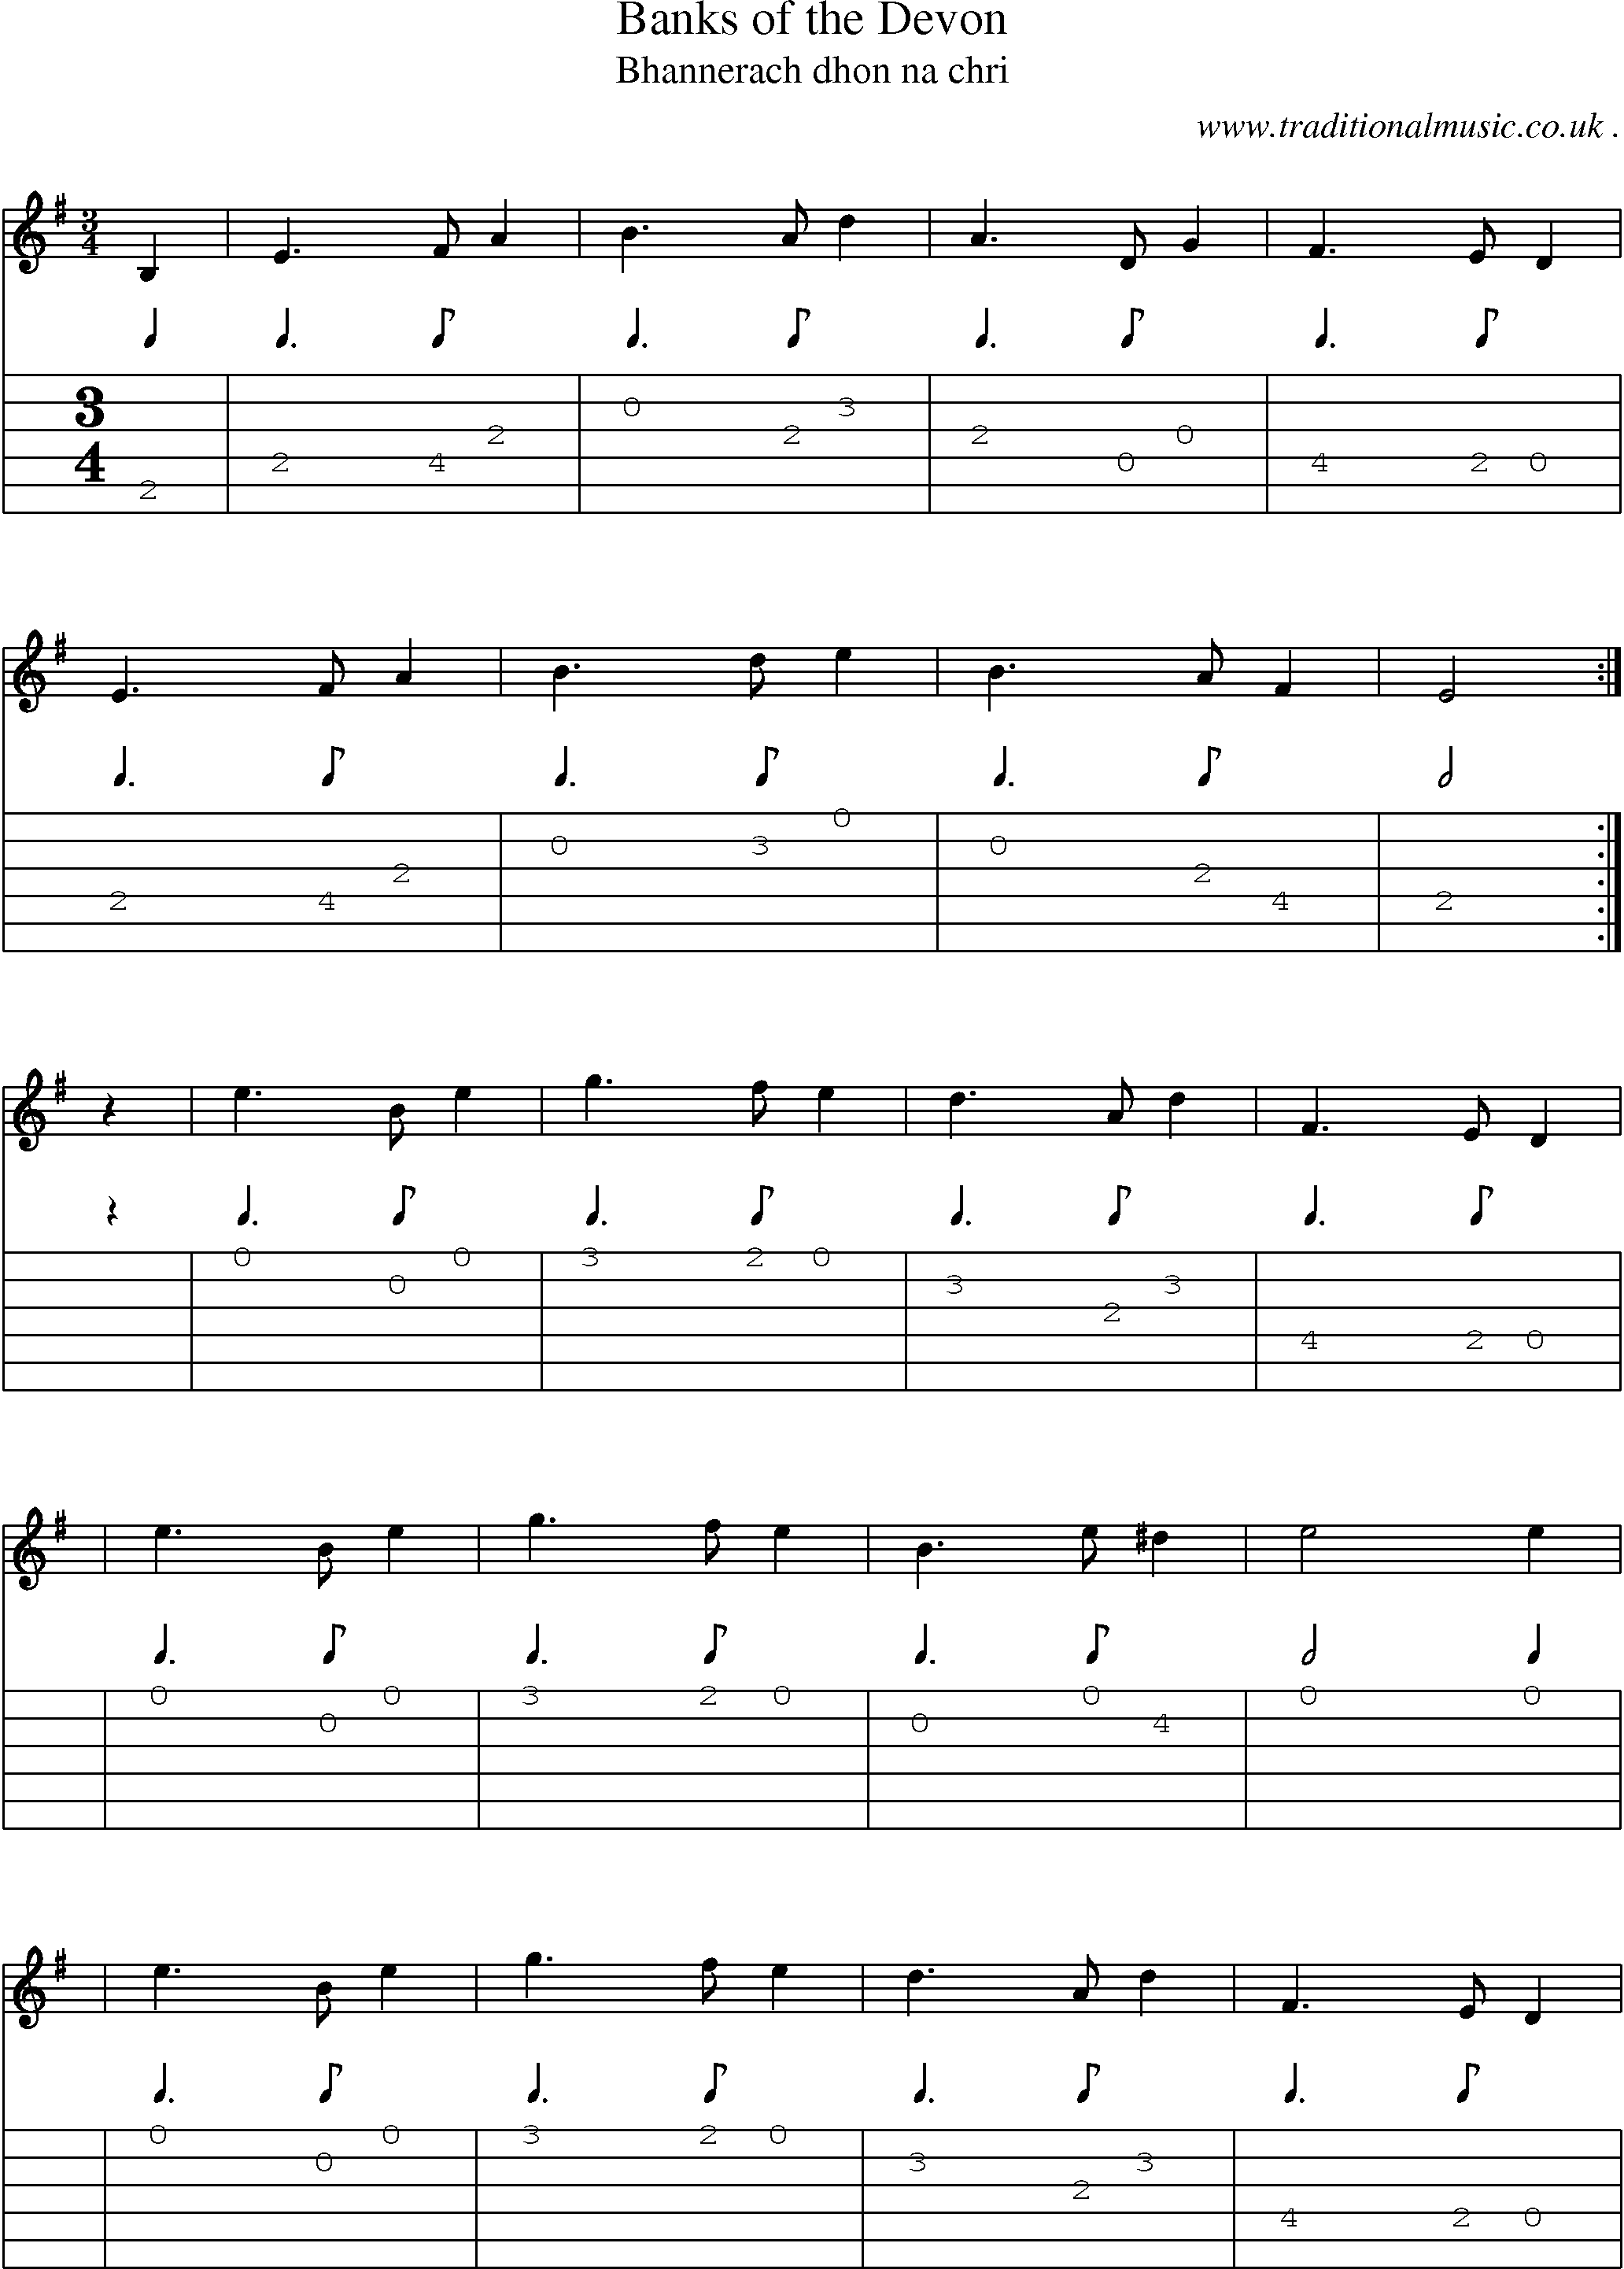 Sheet-music  score, Chords and Guitar Tabs for Banks Of The Devon